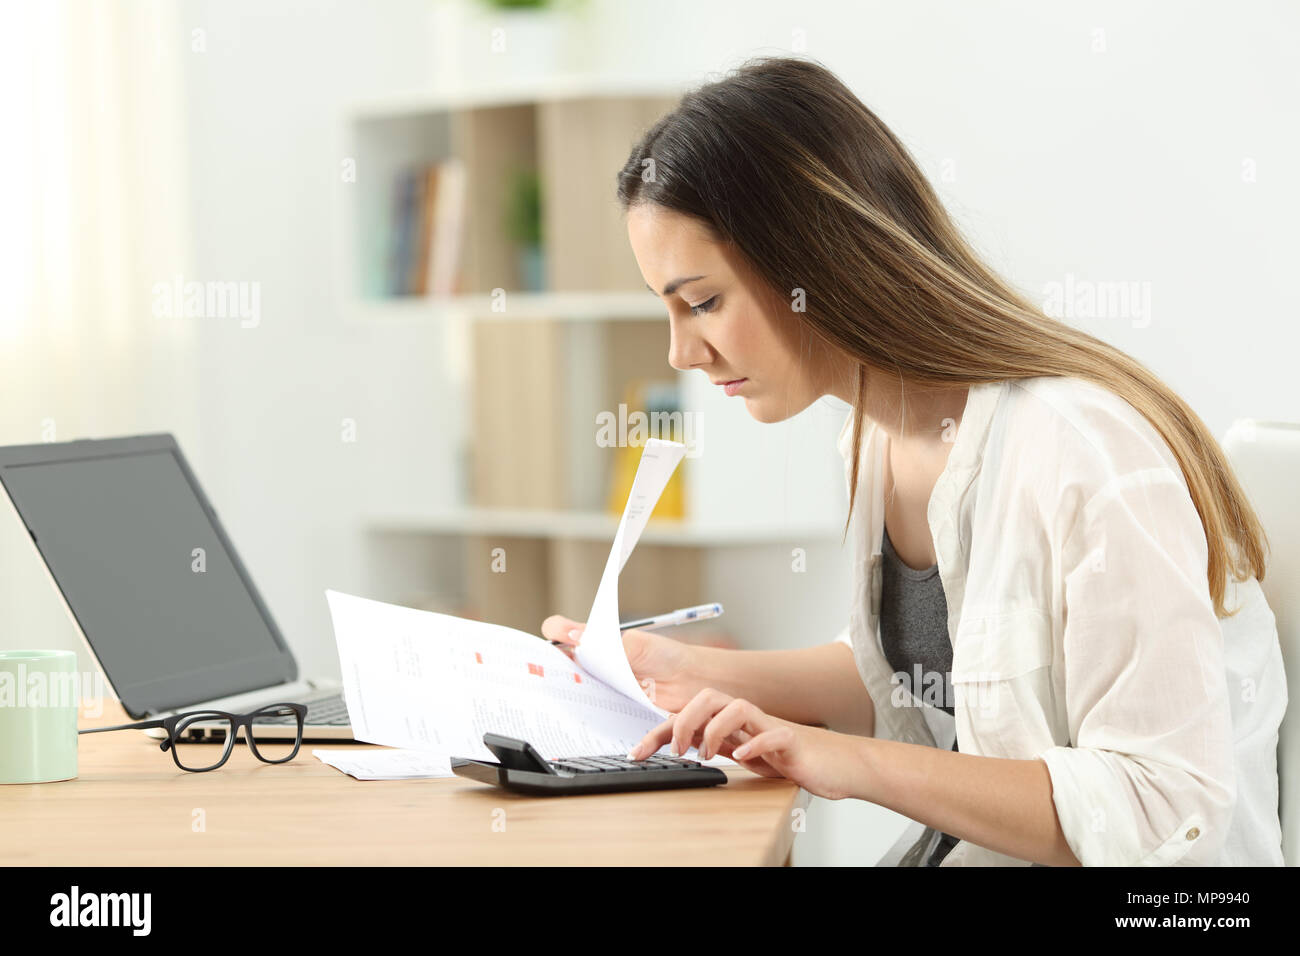 Side view portrait of a woman calculating expenses on a desktop at home Stock Photo